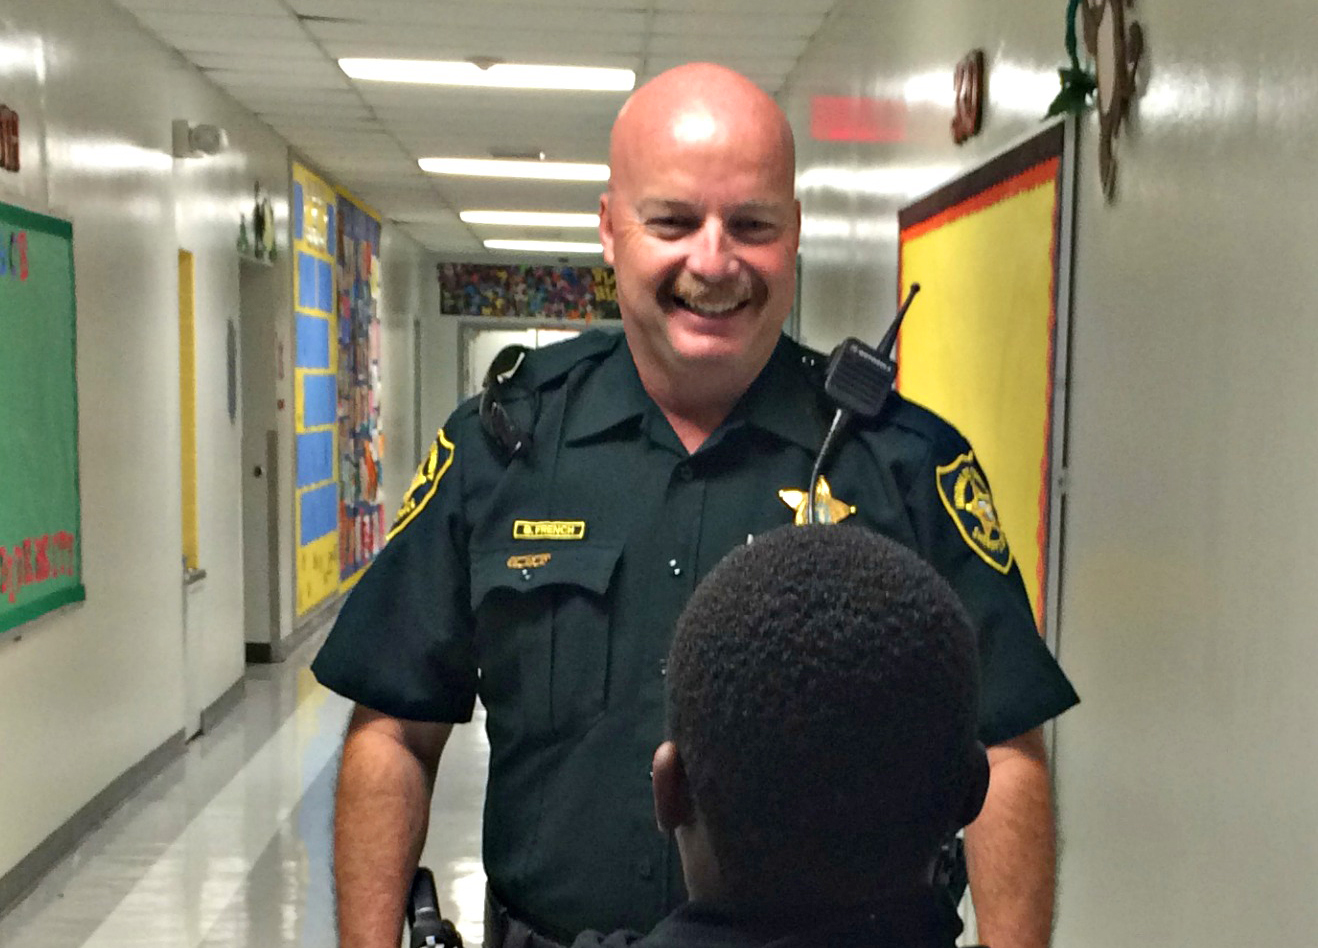 SRO Officer Barry French speaks to a student. French is busy splitting his time between two schools: Tamarac Elementary and Challenger Elementary.